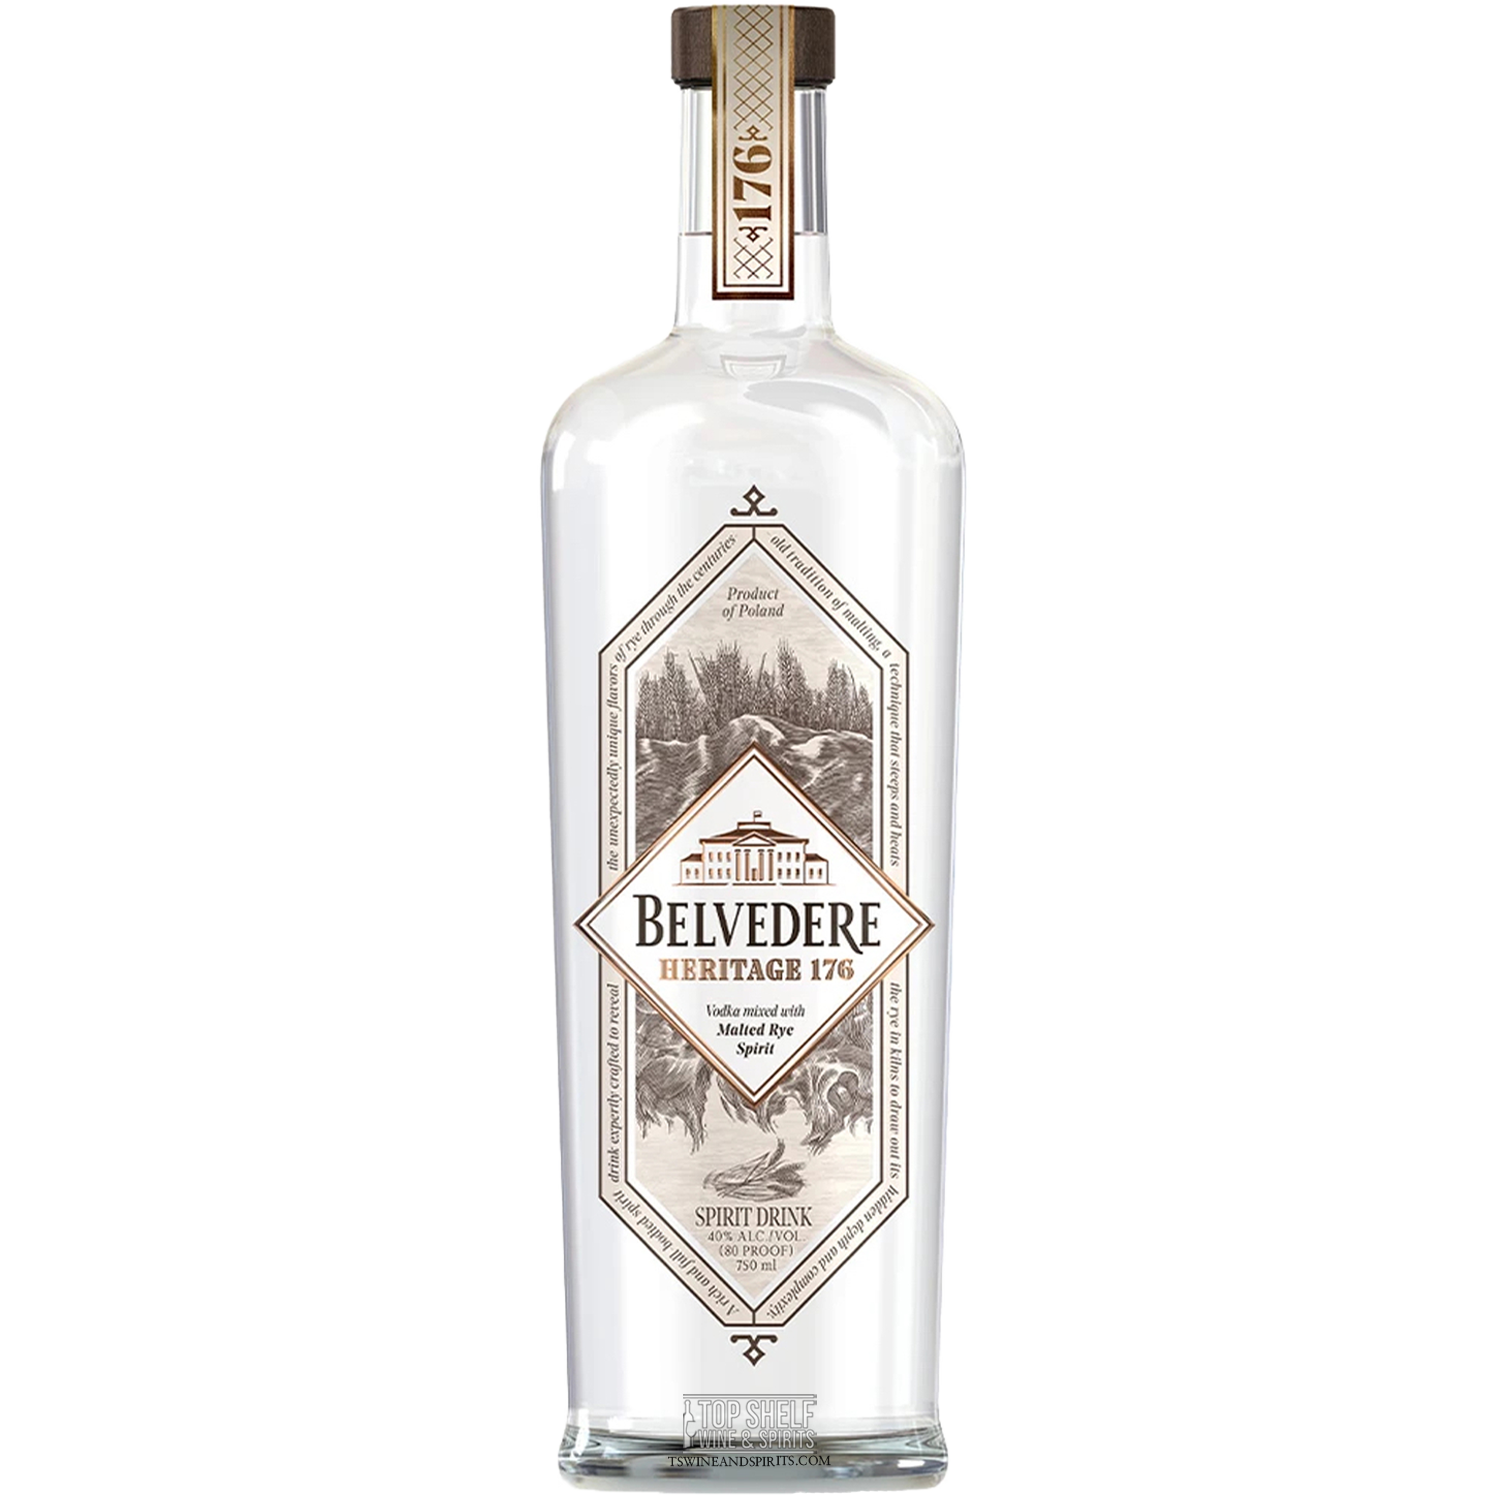 Belvedere Intense Vodka, Poland  prices, stores, product reviews